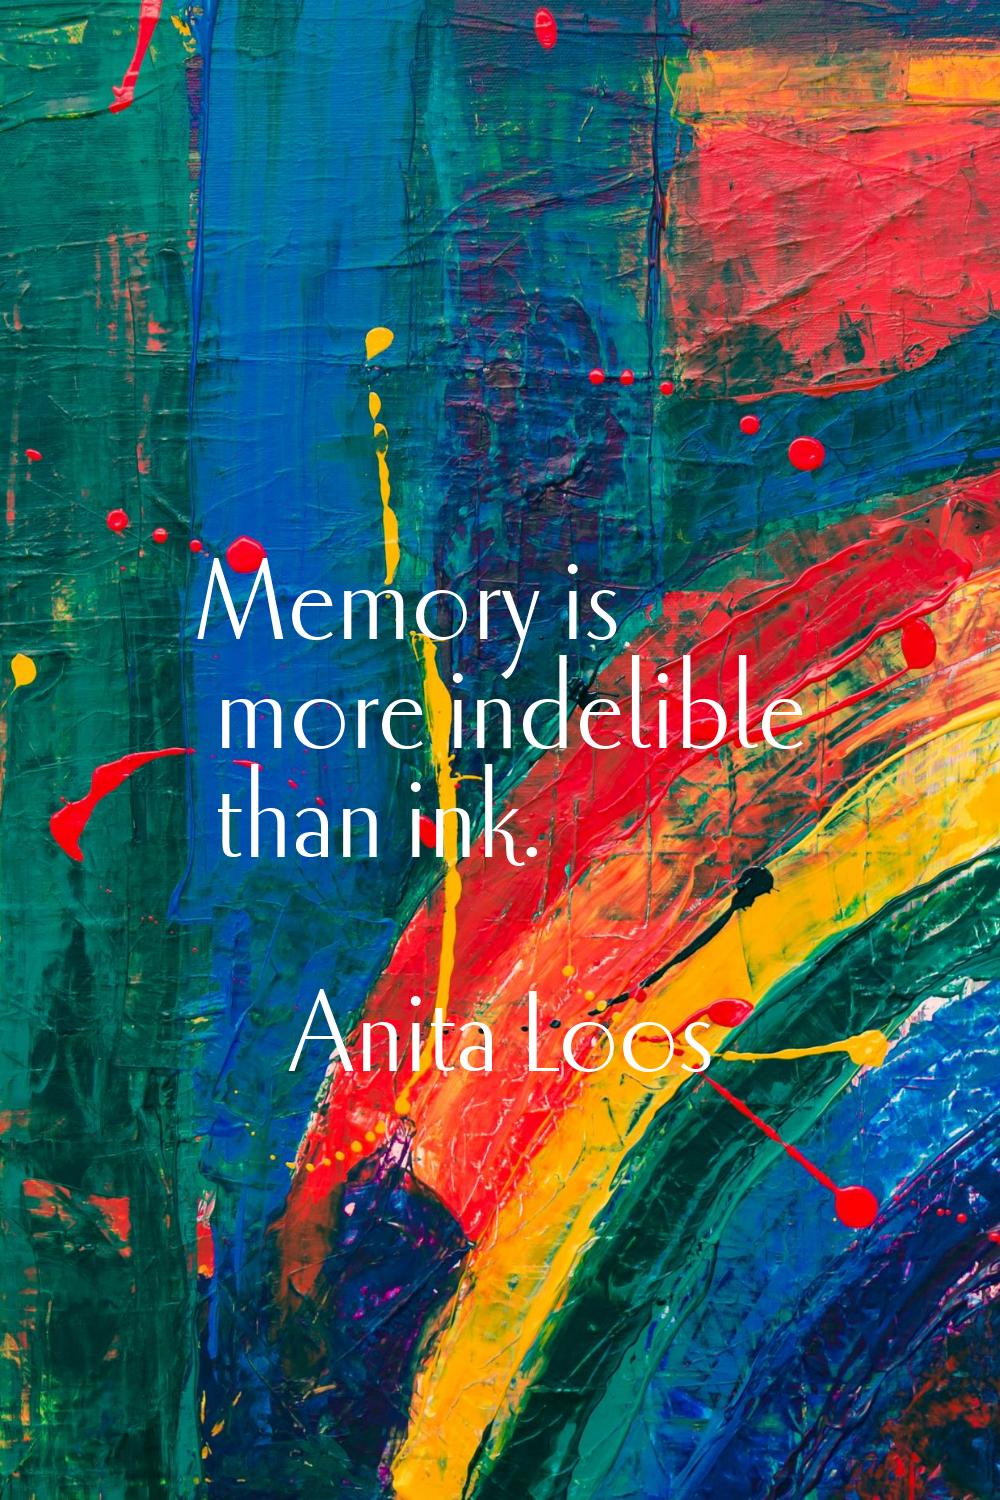 Memory is more indelible than ink.